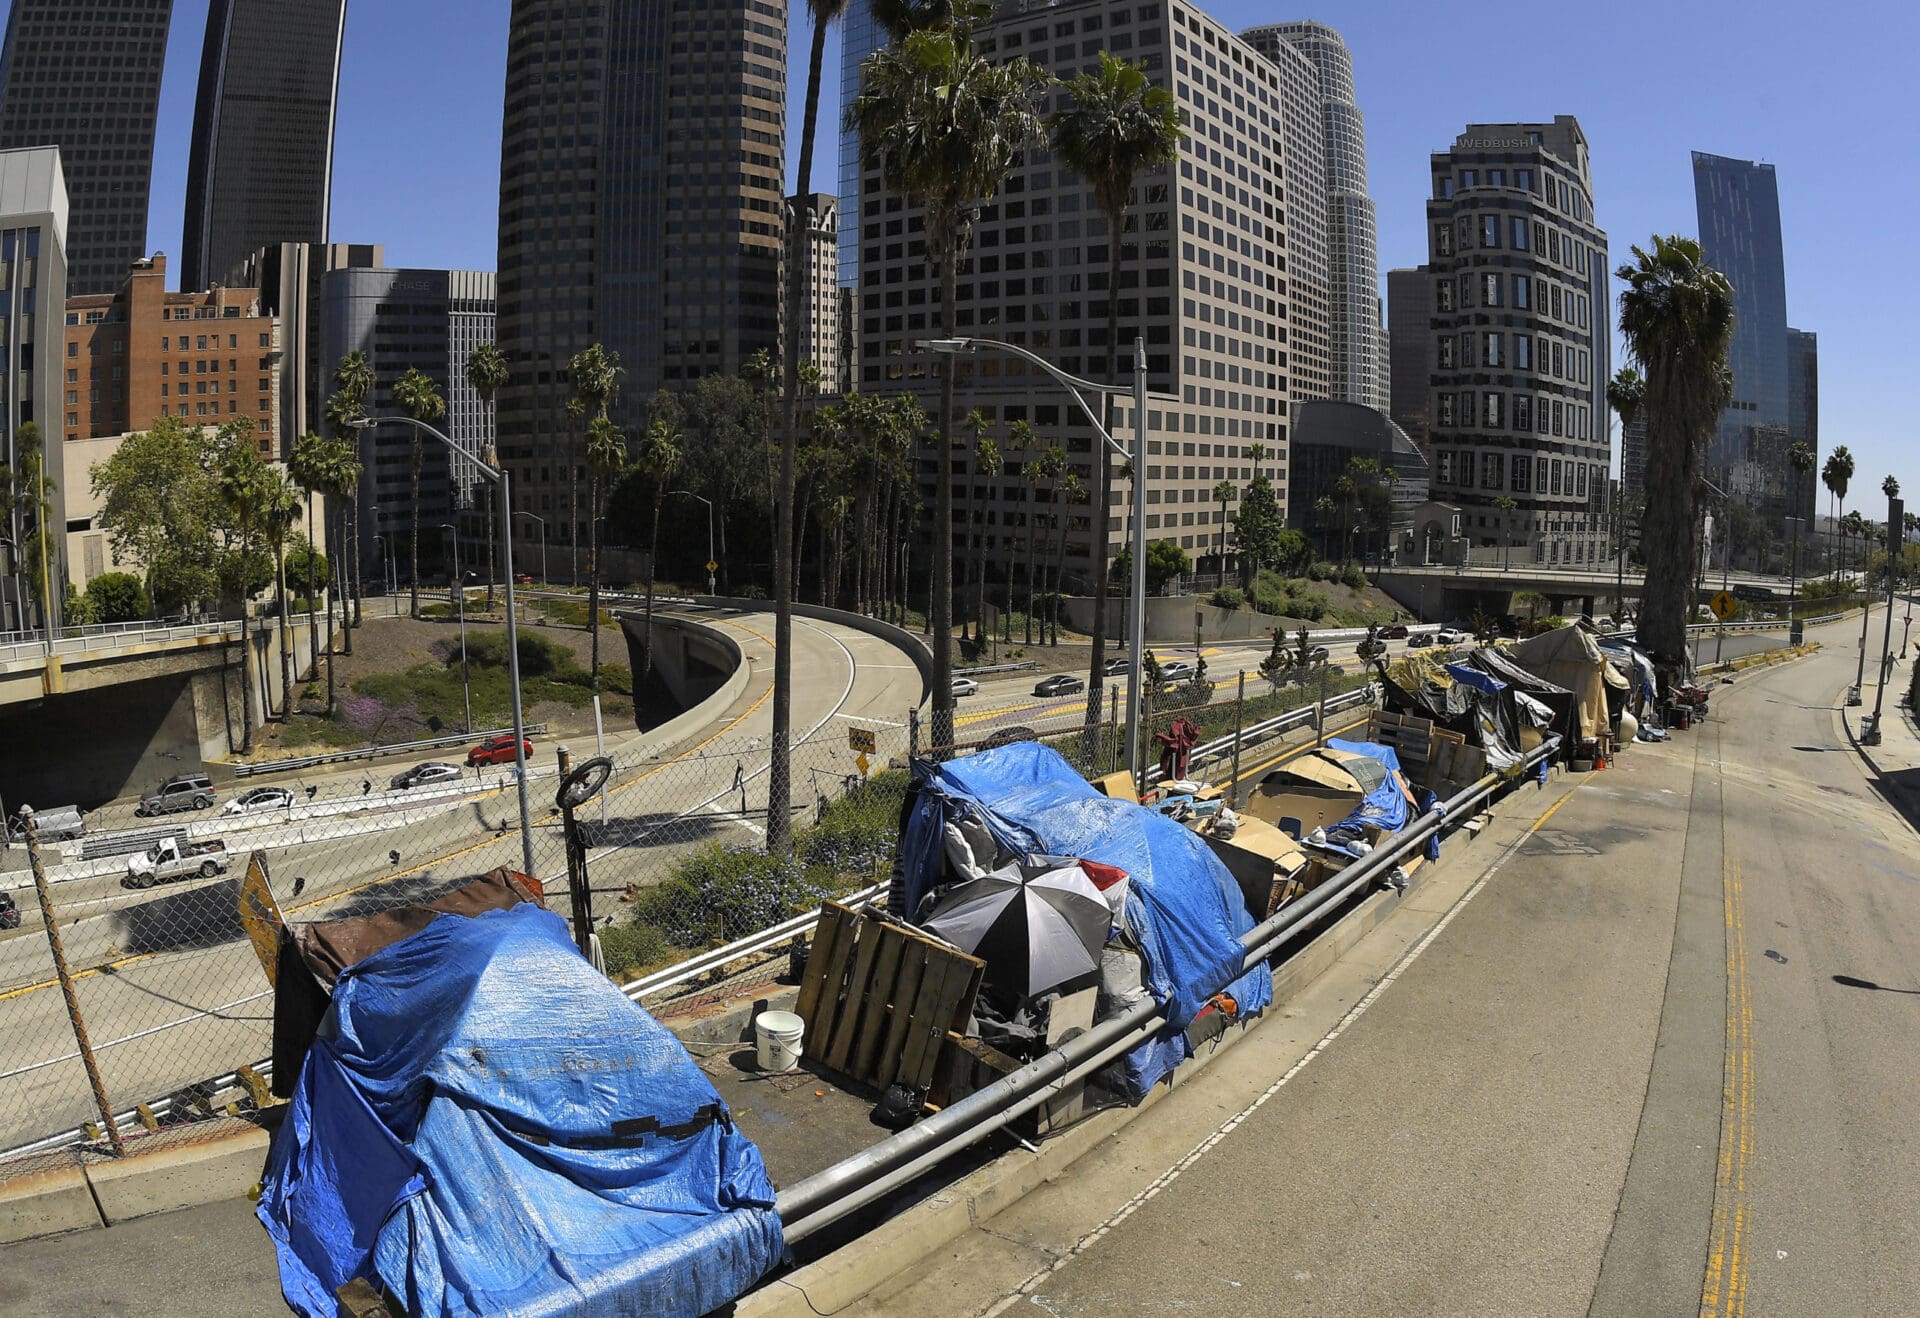 Downtown Los Angeles Homeless Problem